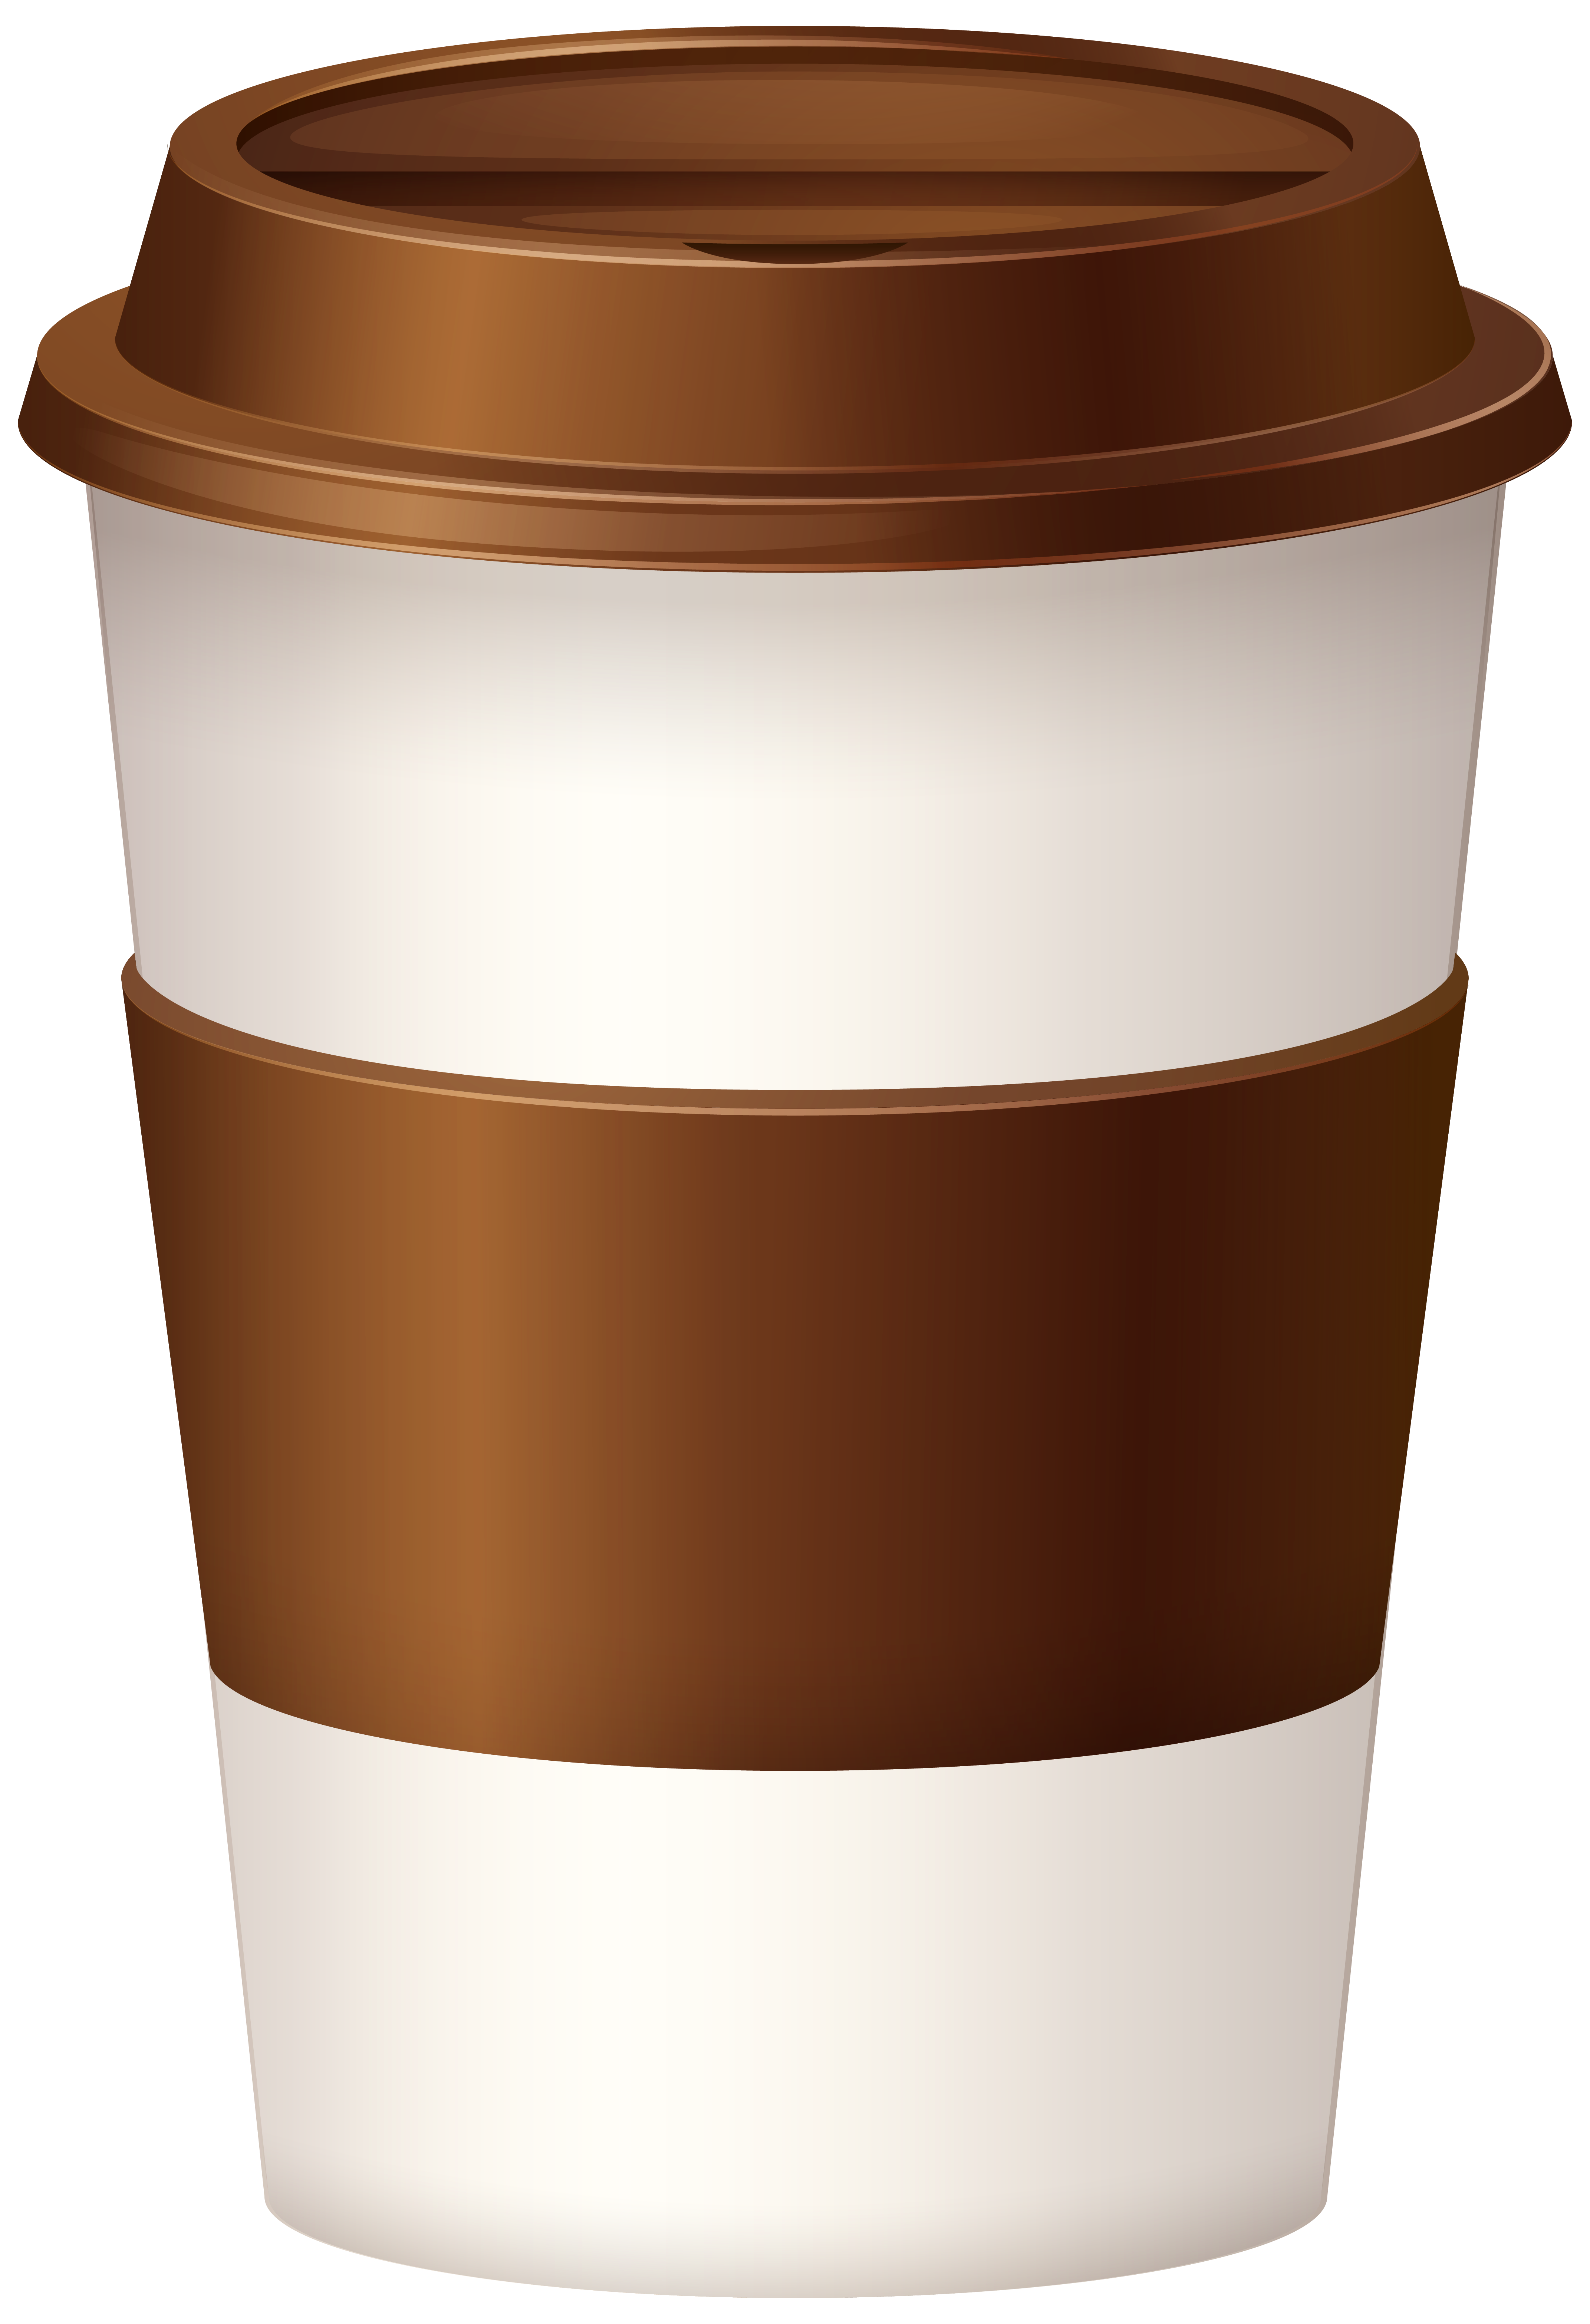 Hot Coffee Cup Png Clipart Image Gallery Yopriceville High Quality Images And Transparent Png Free Clipart